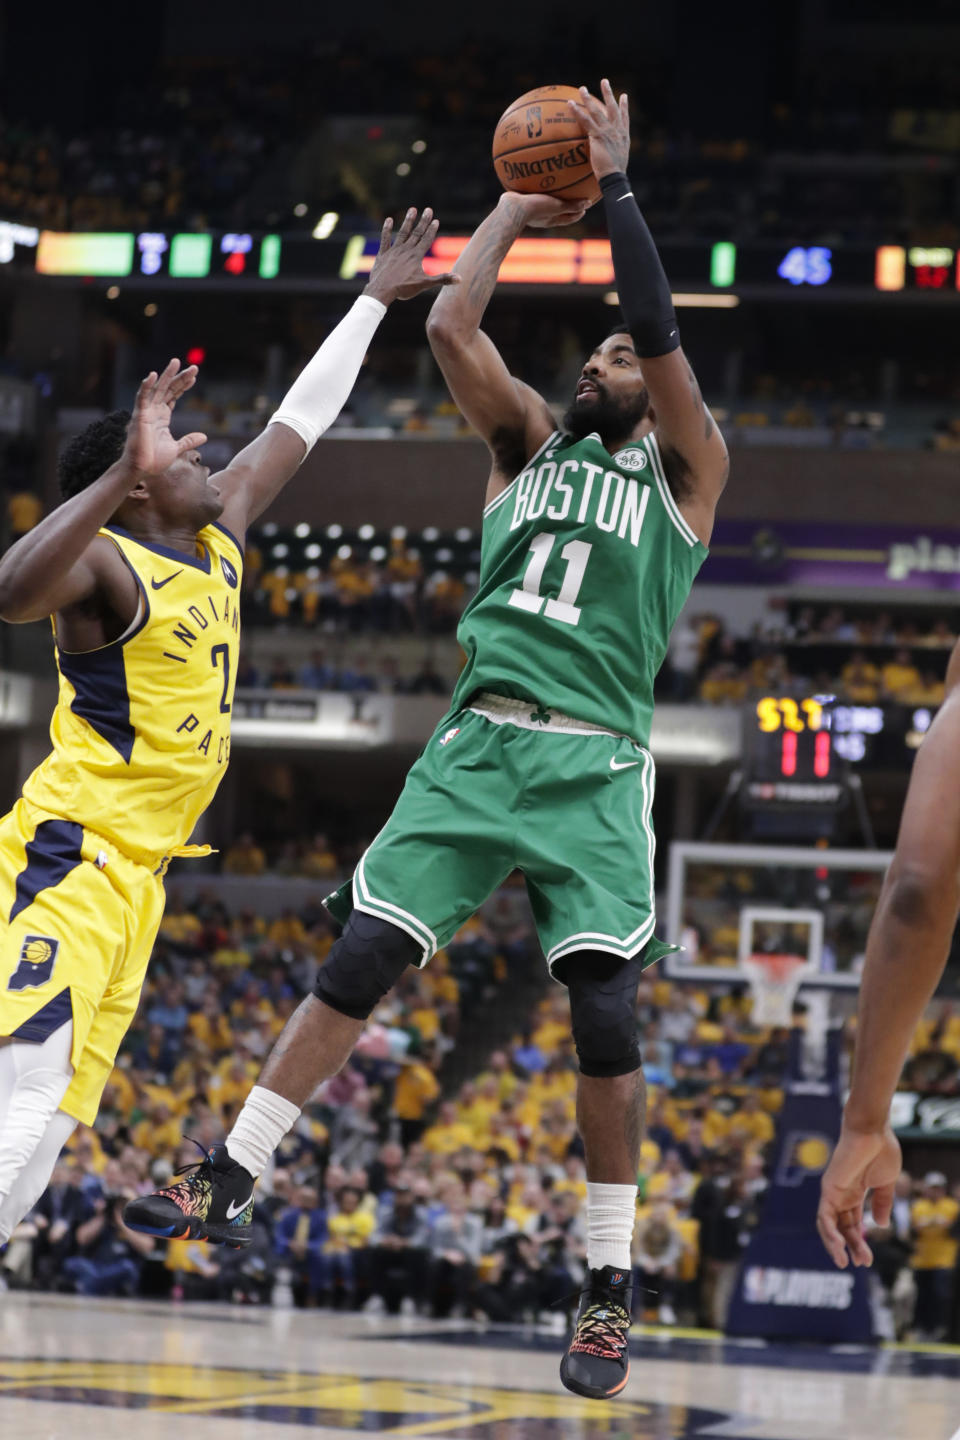 FILE - In this April 21, 2019, file photo, Boston Celtics guard Kyrie Irving (11) shoots over Indiana Pacers guard Darren Collison (2) during the first half of Game 4 of an NBA basketball first-round playoff series in Indianapolis. Just three seasons ago, the Brooklyn Nets were the worst team in the NBA. On Sunday, June 30, 2019, they were the story of the league. They agreed to deals with superstars Kevin Durant and Kyrie Irving as part of a sensational start to free agency, giving the longtime No. 2 team in New York top billing in the Big Apple. (AP Photo/Michael Conroy, File)